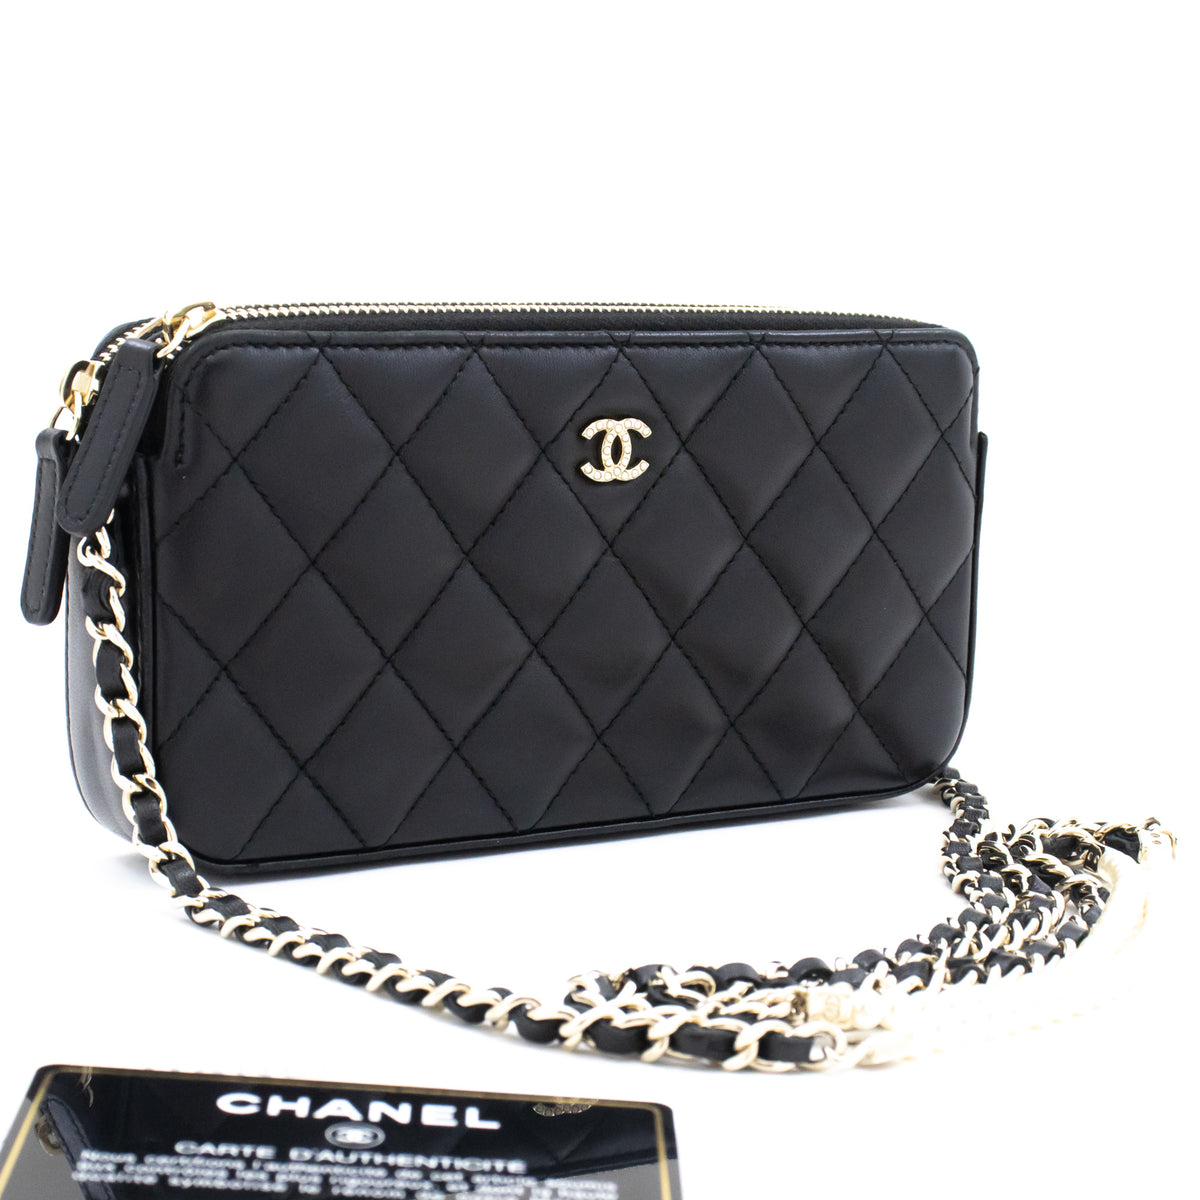 Chanel Wallet on Chain with Top Handle, Black Caviar with Gold Hardware,  New in Box WA001 - Julia Rose Boston